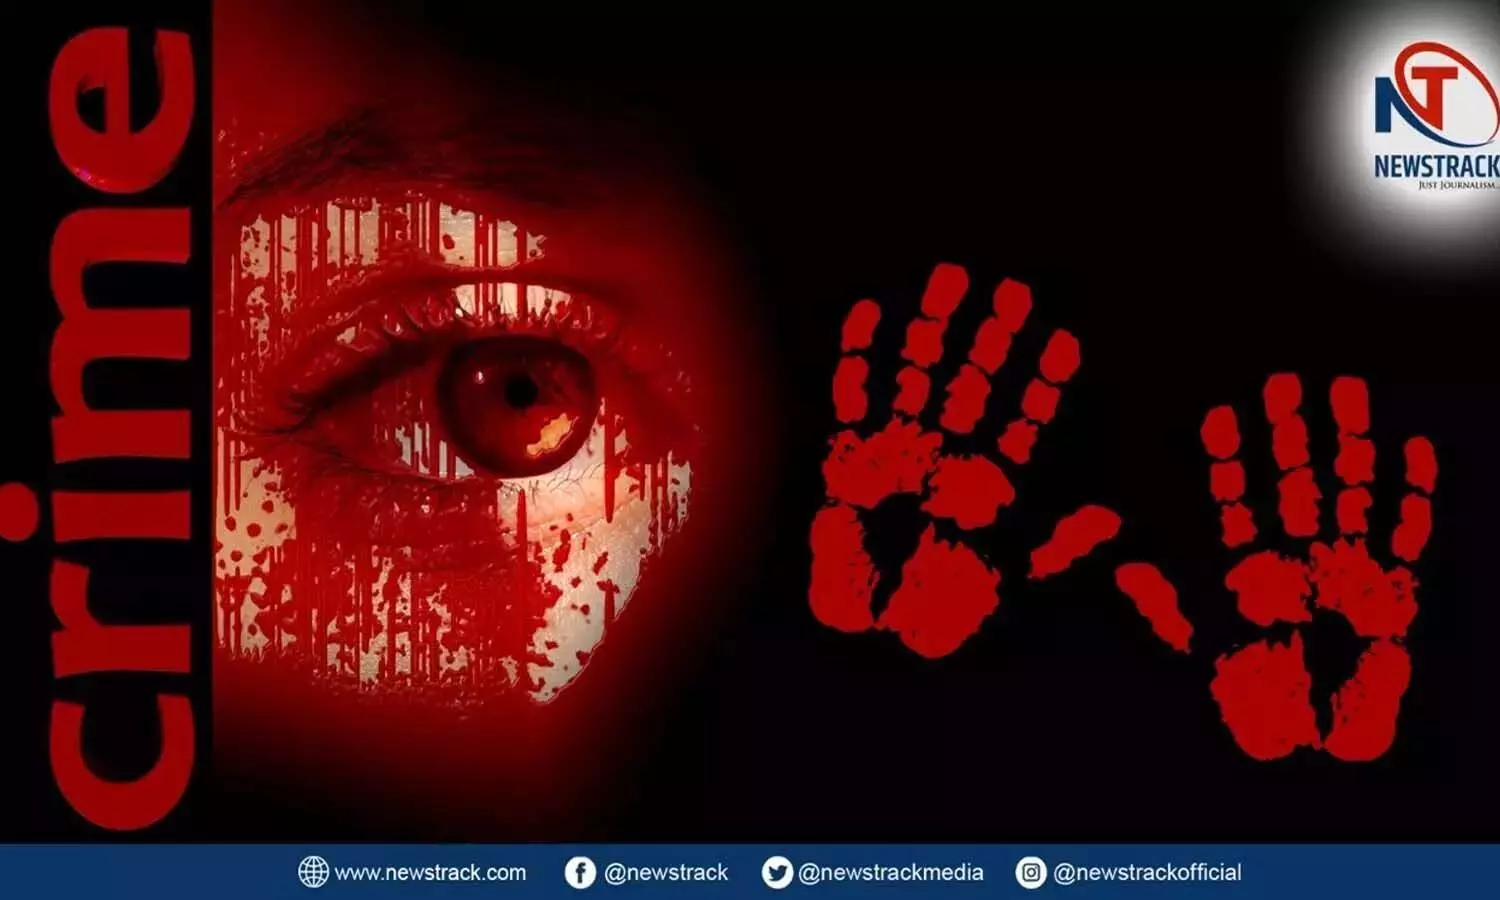 Two youths first asked the girl about her caste, then quarreled and raped her